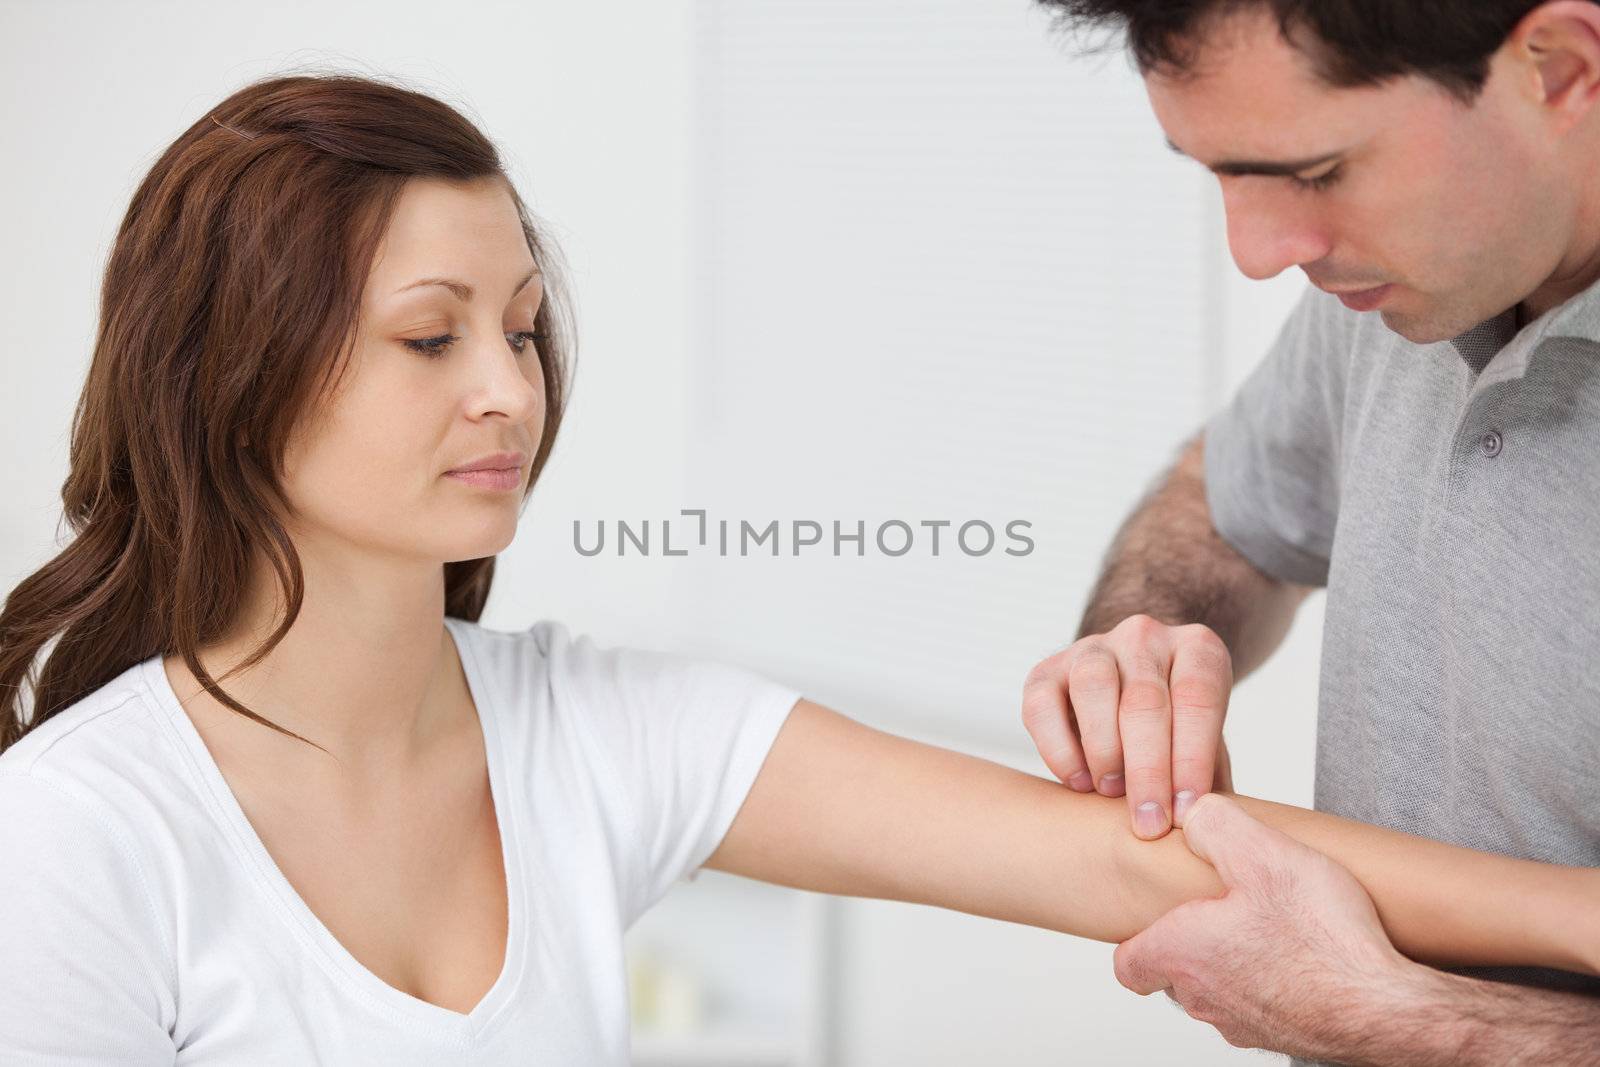 Doctor examining the arm of a patient in a room